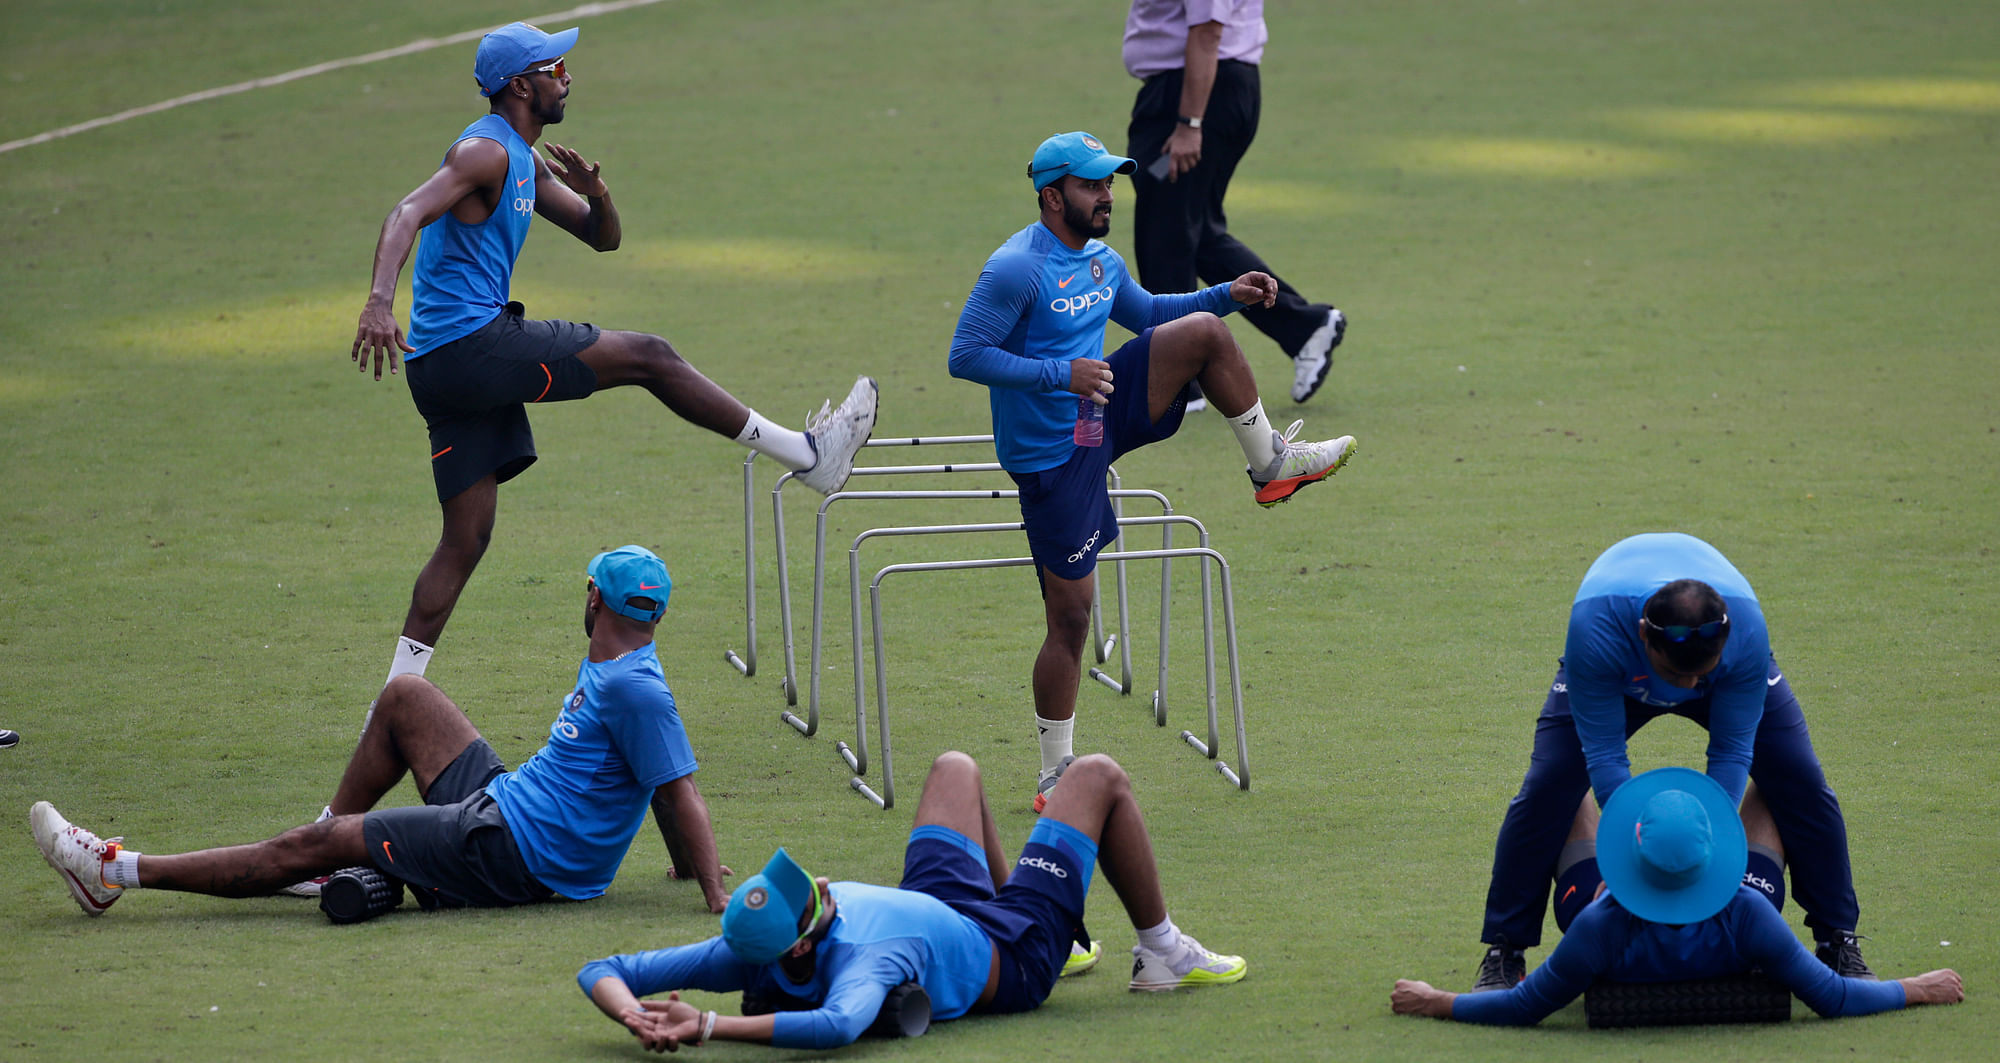 The Indian squad will arrive in Sydney on November 12 where they will quarantine ahead of the three ODIs, three T20Is and four Test matches to be played between November 27 and January 19